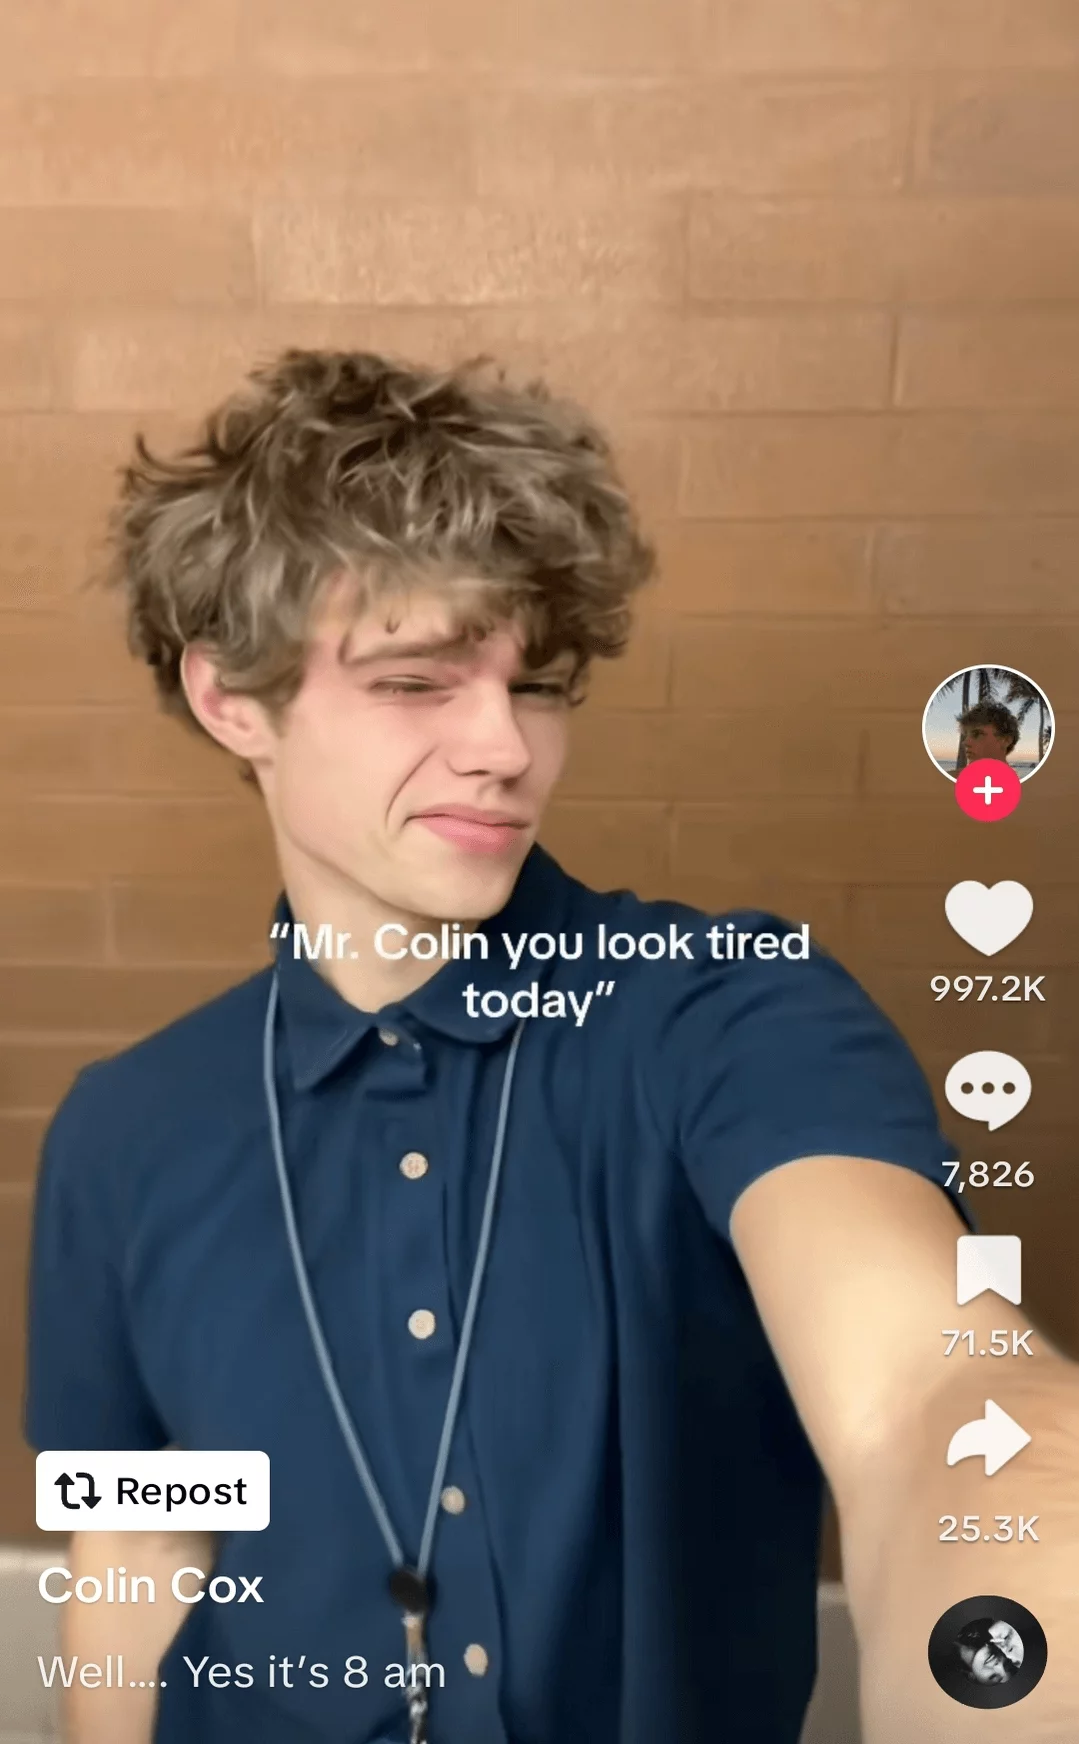 Young man with a tousled hairstyle making a wry expression, featured in a lighthearted social media post about looking tired early in the morning.